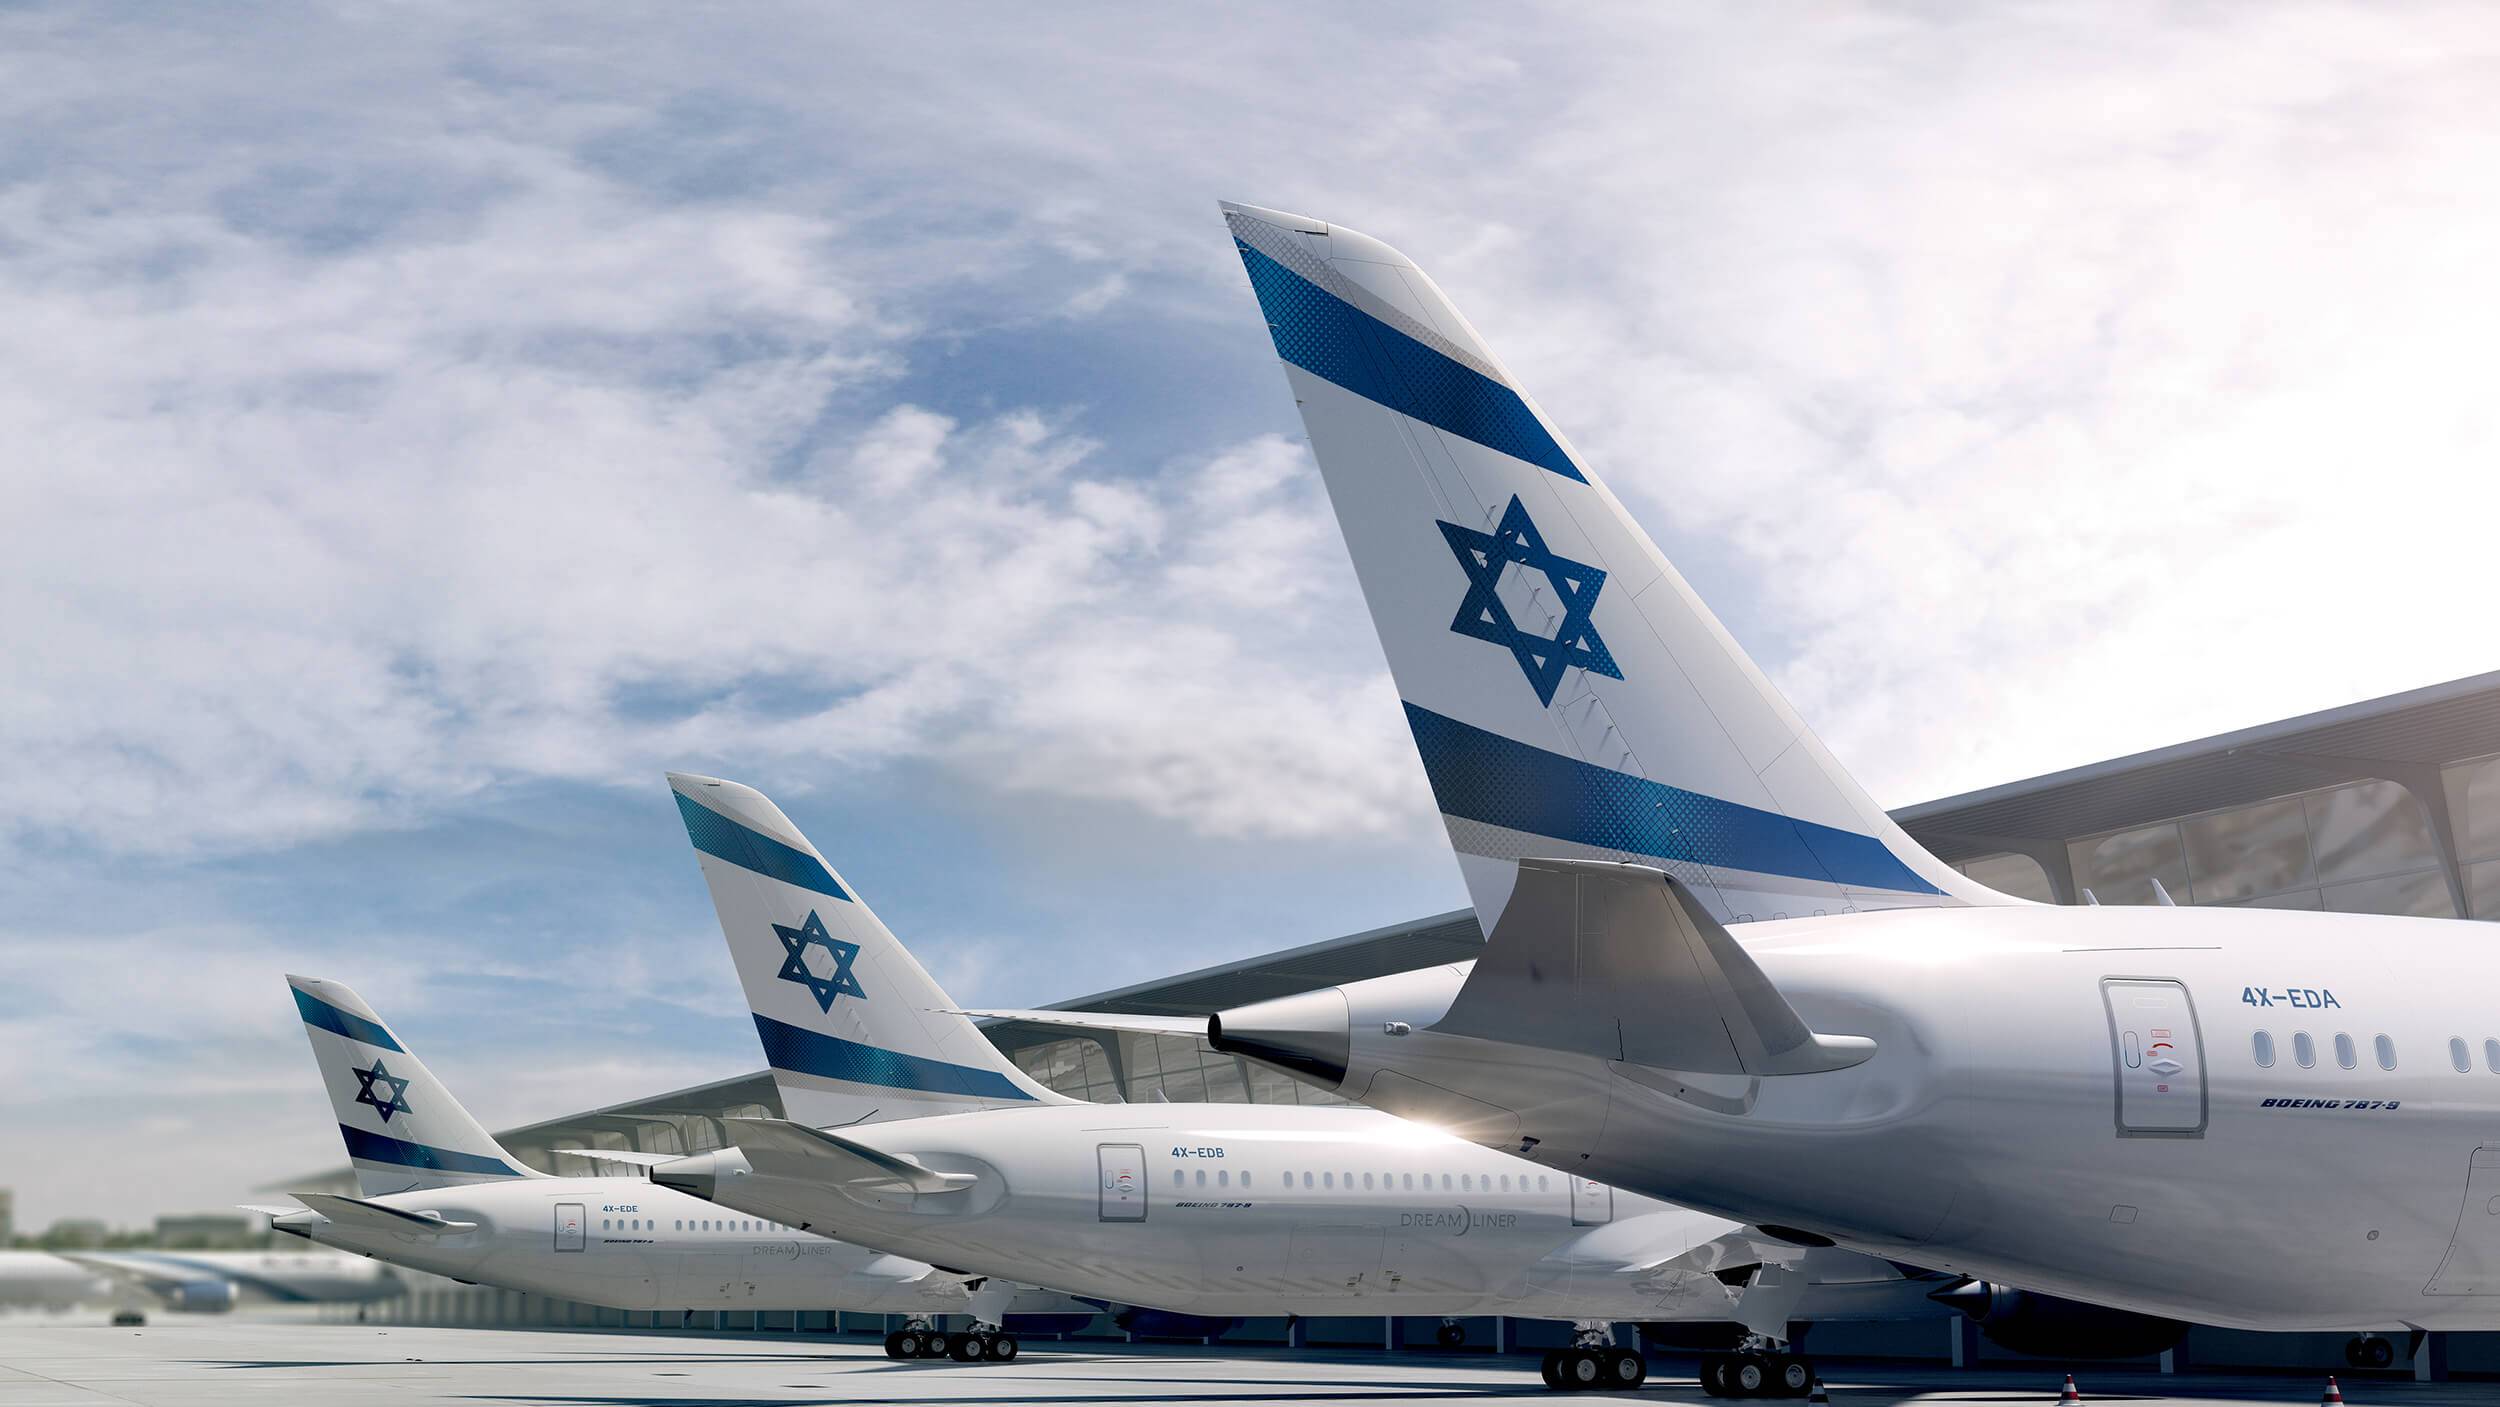 Three aircraft lined up at an airport terminal showcasing the El Al livery on the aircraft tail fins